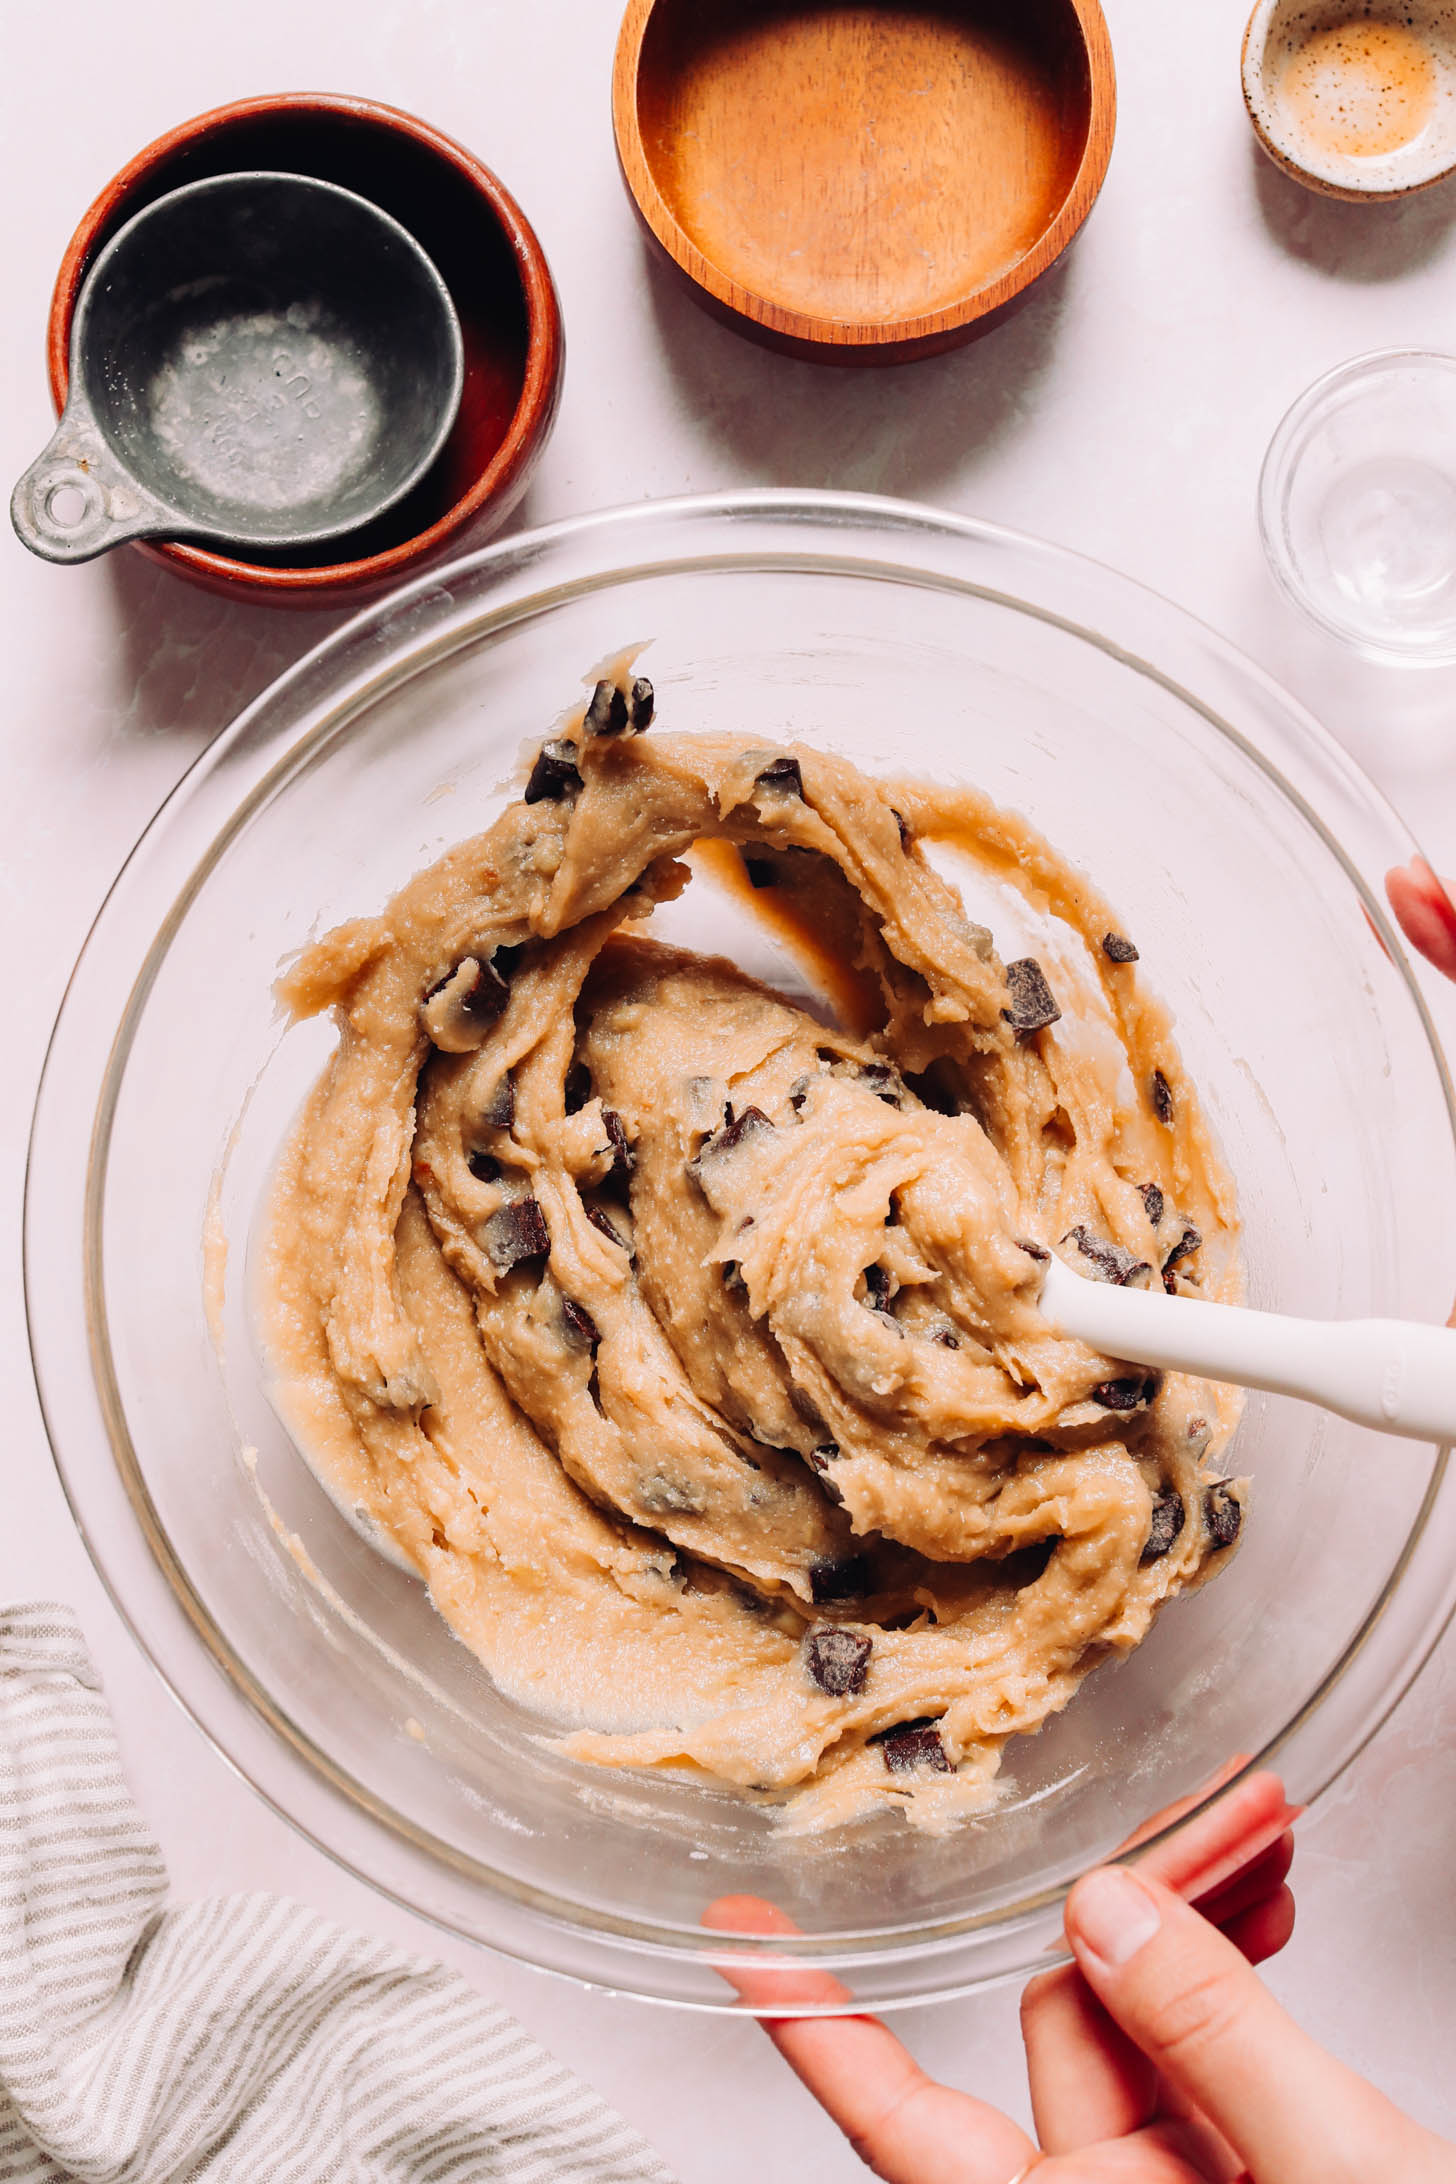 Rubber spatula in a bowl of chocolate chip blondie batter